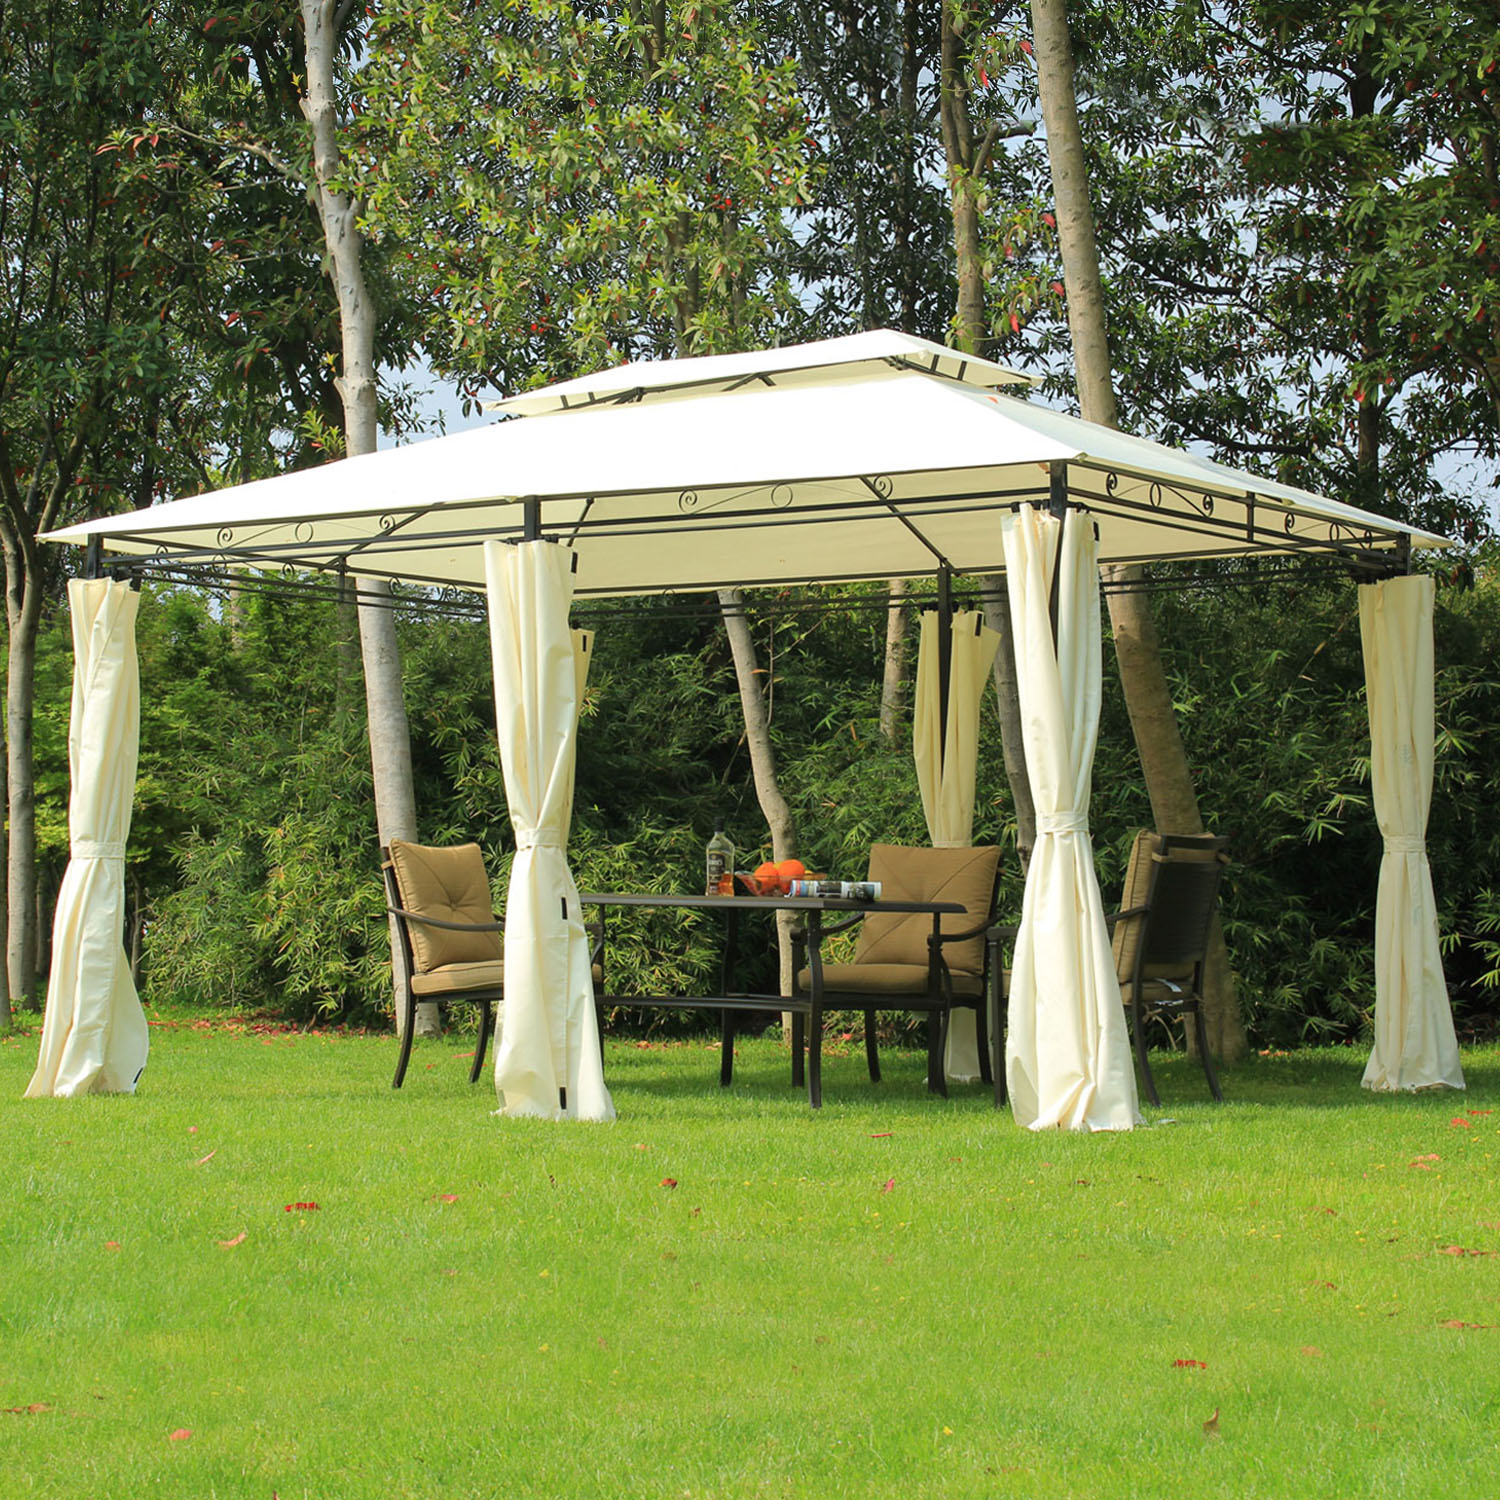 Canopies Gazebos Pergolas Patio Furniture Accessories intended for size 1500 X 1500